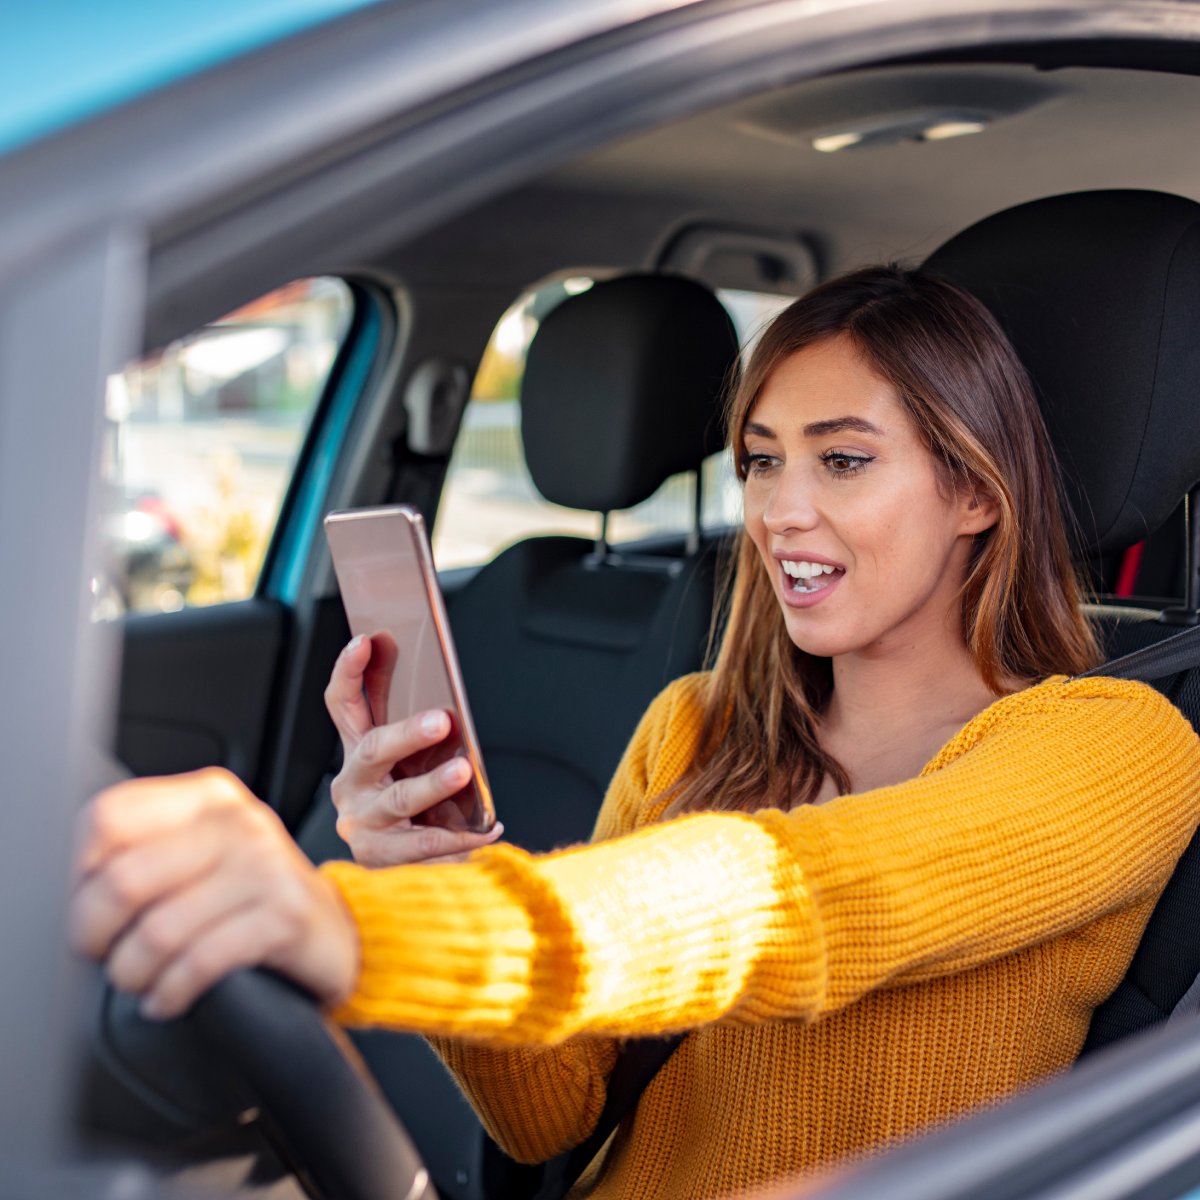 April is Distracted Driving Awareness Month, and you may see increased law enforcement on the roadways as part of the national media campaign Put the Phone Away or Pay. This campaign reminds drivers of the deadly dangers and the legal consequences of distracted driving.